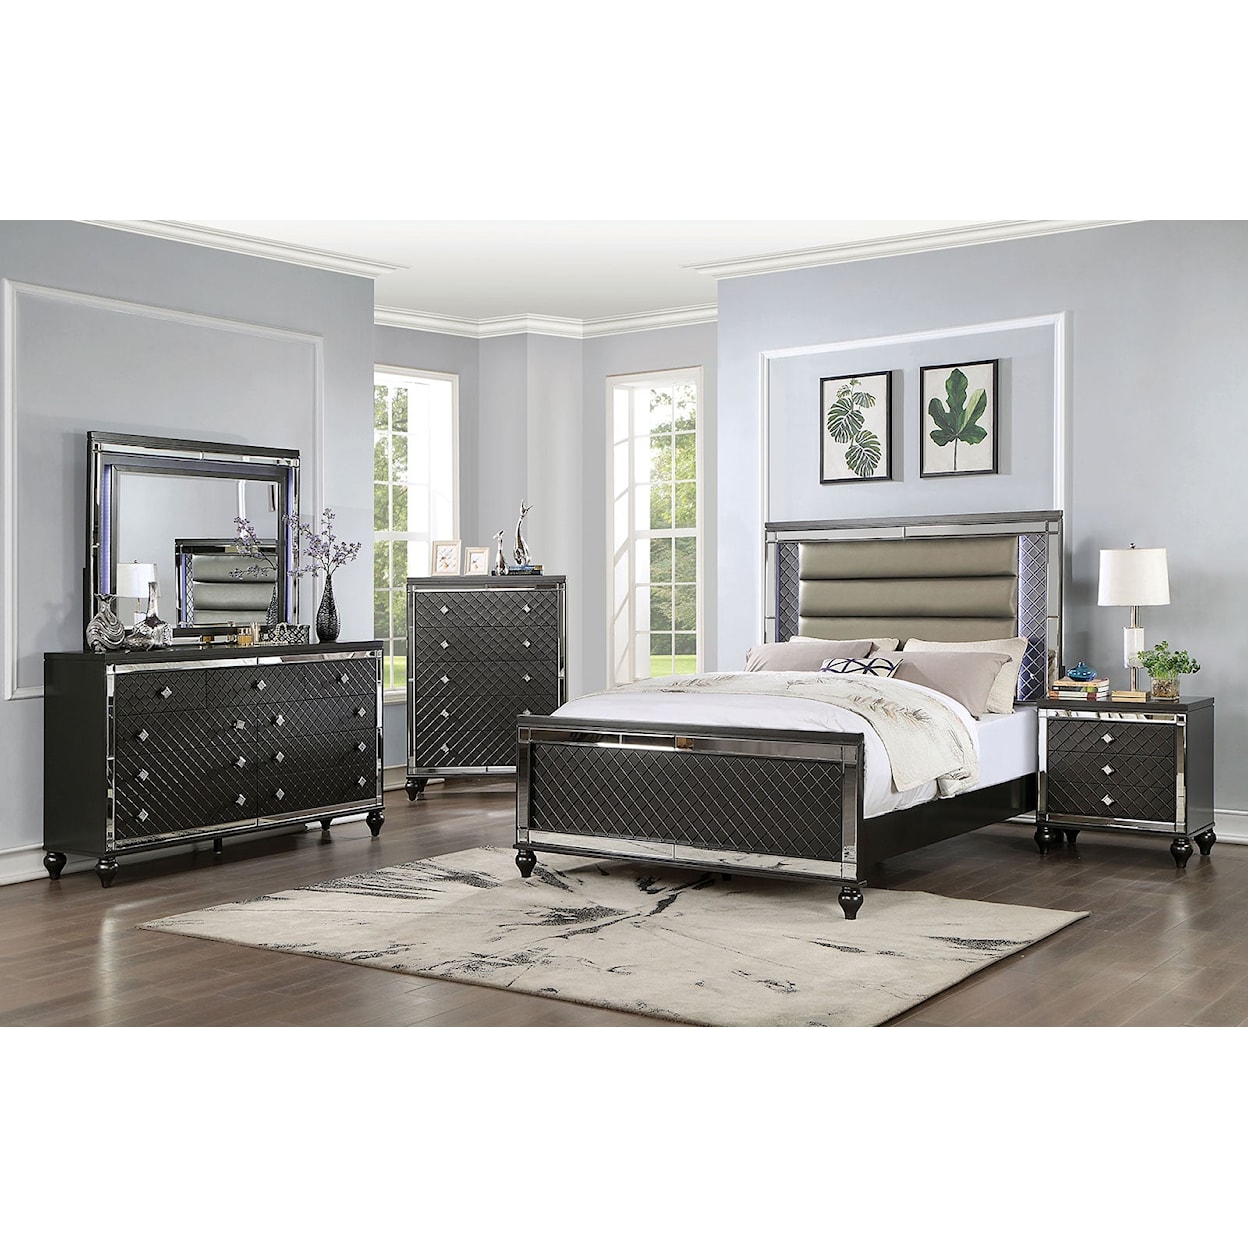 Furniture of America CALANDRIA California King Bed with Built-In Lighting